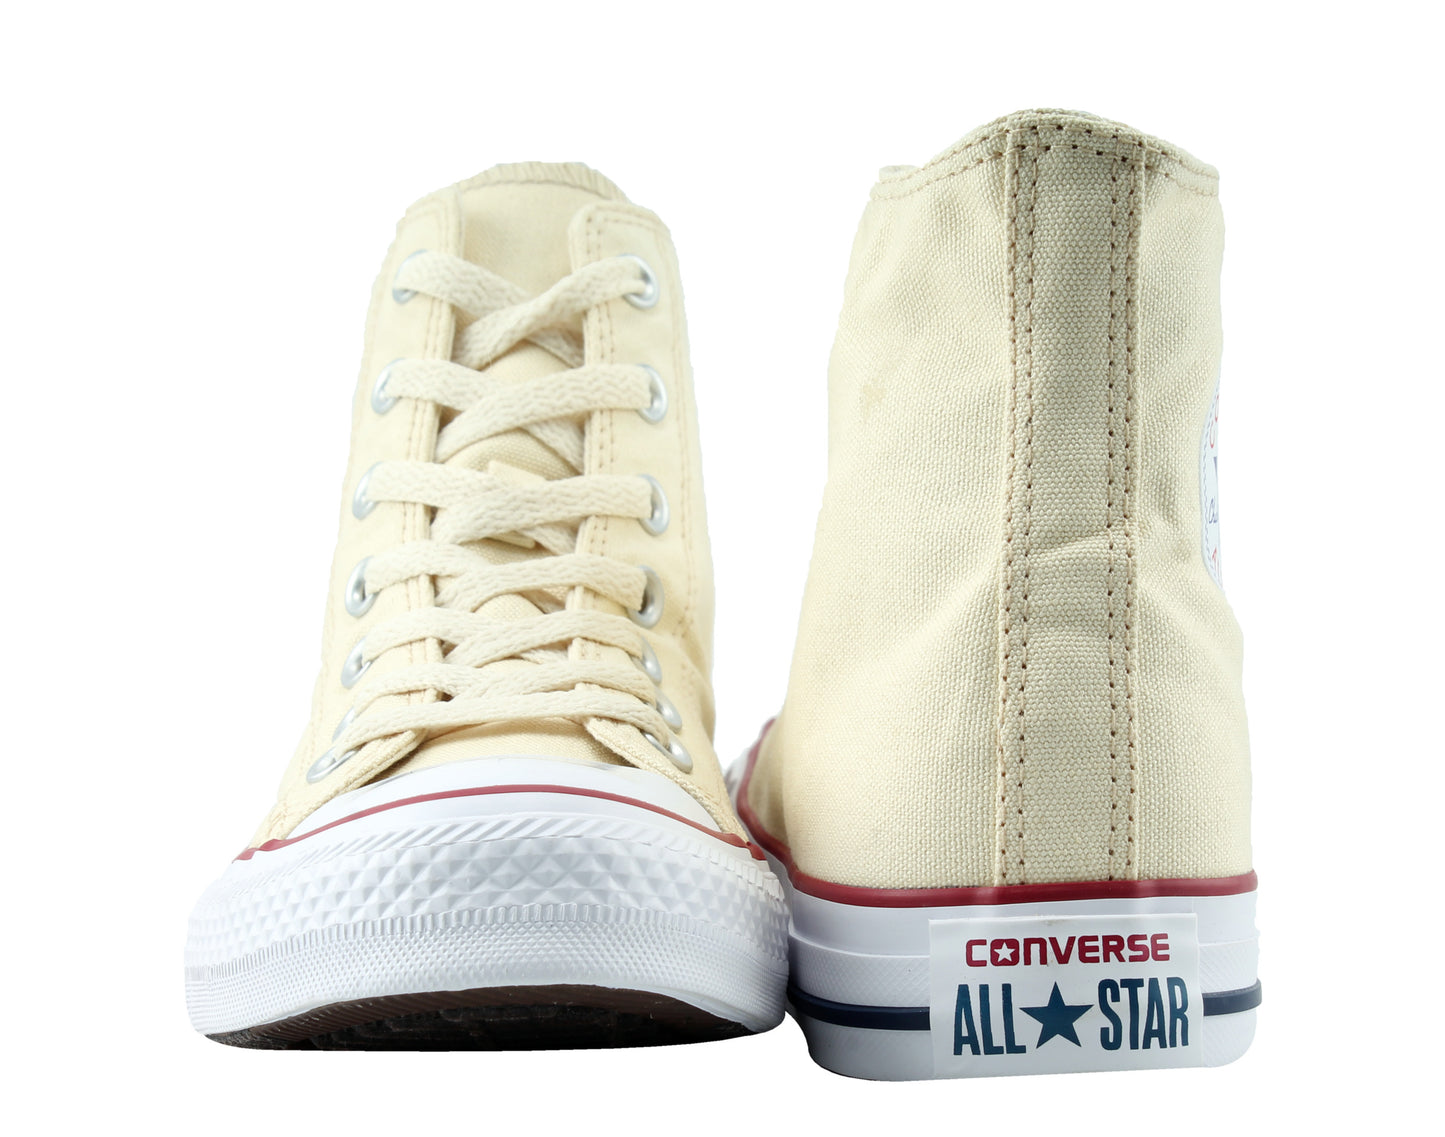 Converse Chuck Taylor All Star White High Top Sneakers M9162